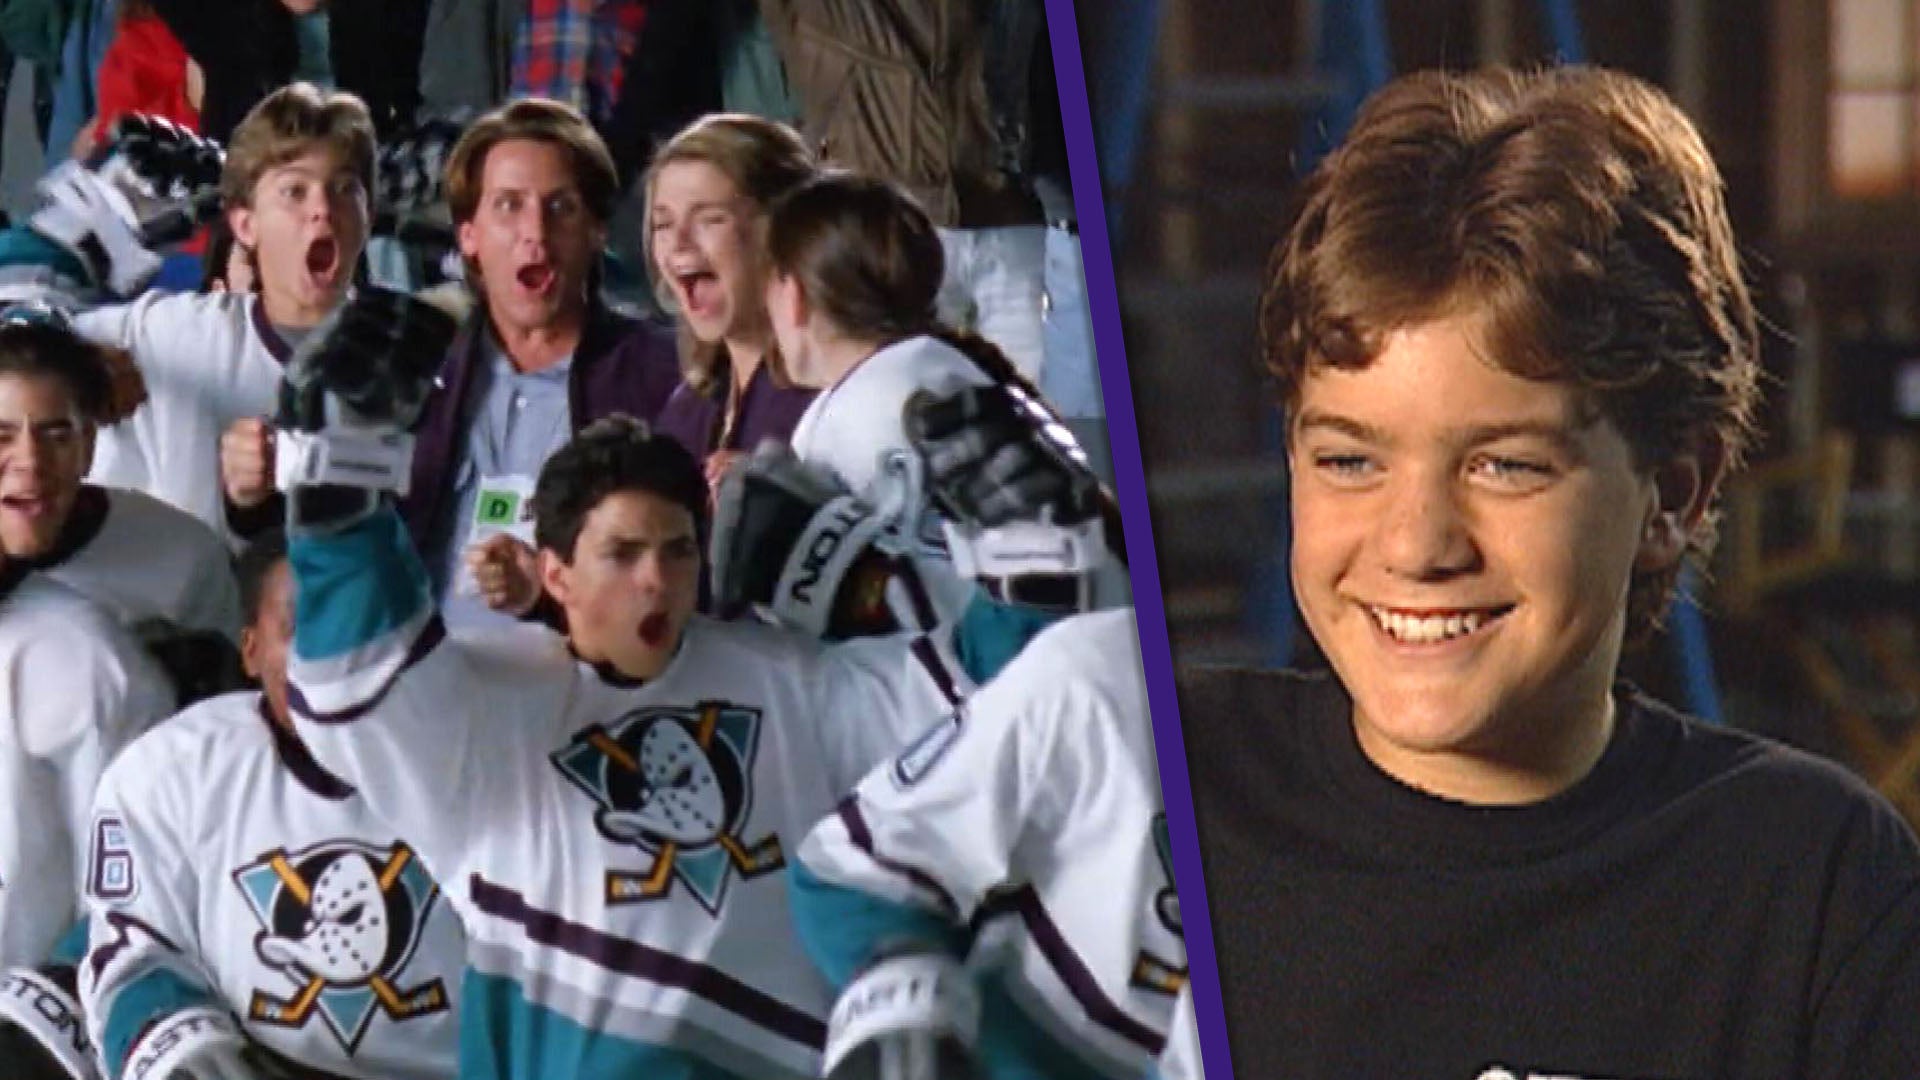 'D2: The Mighty Ducks' Turns 30! Watch Joshua Jackson and Cast's Rare On-Set Interviews